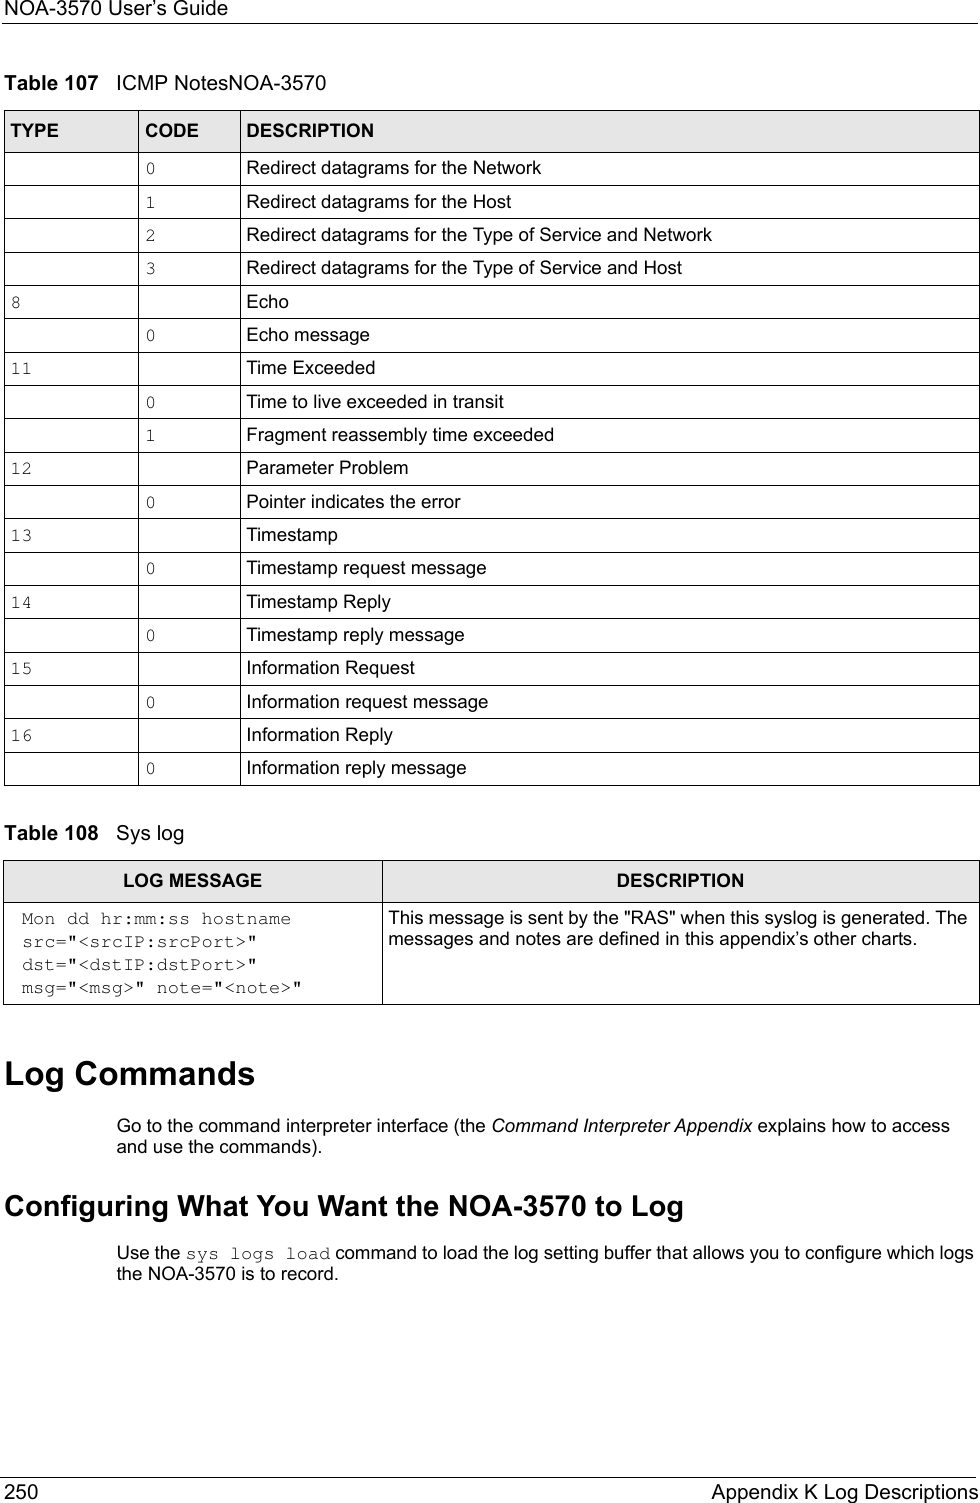 NOA-3570 User’s Guide250 Appendix K Log DescriptionsLog CommandsGo to the command interpreter interface (the Command Interpreter Appendix explains how to access and use the commands).Configuring What You Want the NOA-3570 to LogUse the sys logs load command to load the log setting buffer that allows you to configure which logs the NOA-3570 is to record.0Redirect datagrams for the Network1Redirect datagrams for the Host2Redirect datagrams for the Type of Service and Network3Redirect datagrams for the Type of Service and Host8Echo0Echo message11 Time Exceeded0Time to live exceeded in transit1Fragment reassembly time exceeded12 Parameter Problem0Pointer indicates the error13 Timestamp0Timestamp request message14 Timestamp Reply0Timestamp reply message15 Information Request0Information request message16 Information Reply0Information reply messageTable 108   Sys logLOG MESSAGE DESCRIPTIONMon dd hr:mm:ss hostname src=&quot;&lt;srcIP:srcPort&gt;&quot; dst=&quot;&lt;dstIP:dstPort&gt;&quot; msg=&quot;&lt;msg&gt;&quot; note=&quot;&lt;note&gt;&quot;This message is sent by the &quot;RAS&quot; when this syslog is generated. The messages and notes are defined in this appendix’s other charts.Table 107   ICMP NotesNOA-3570TYPE CODE DESCRIPTION